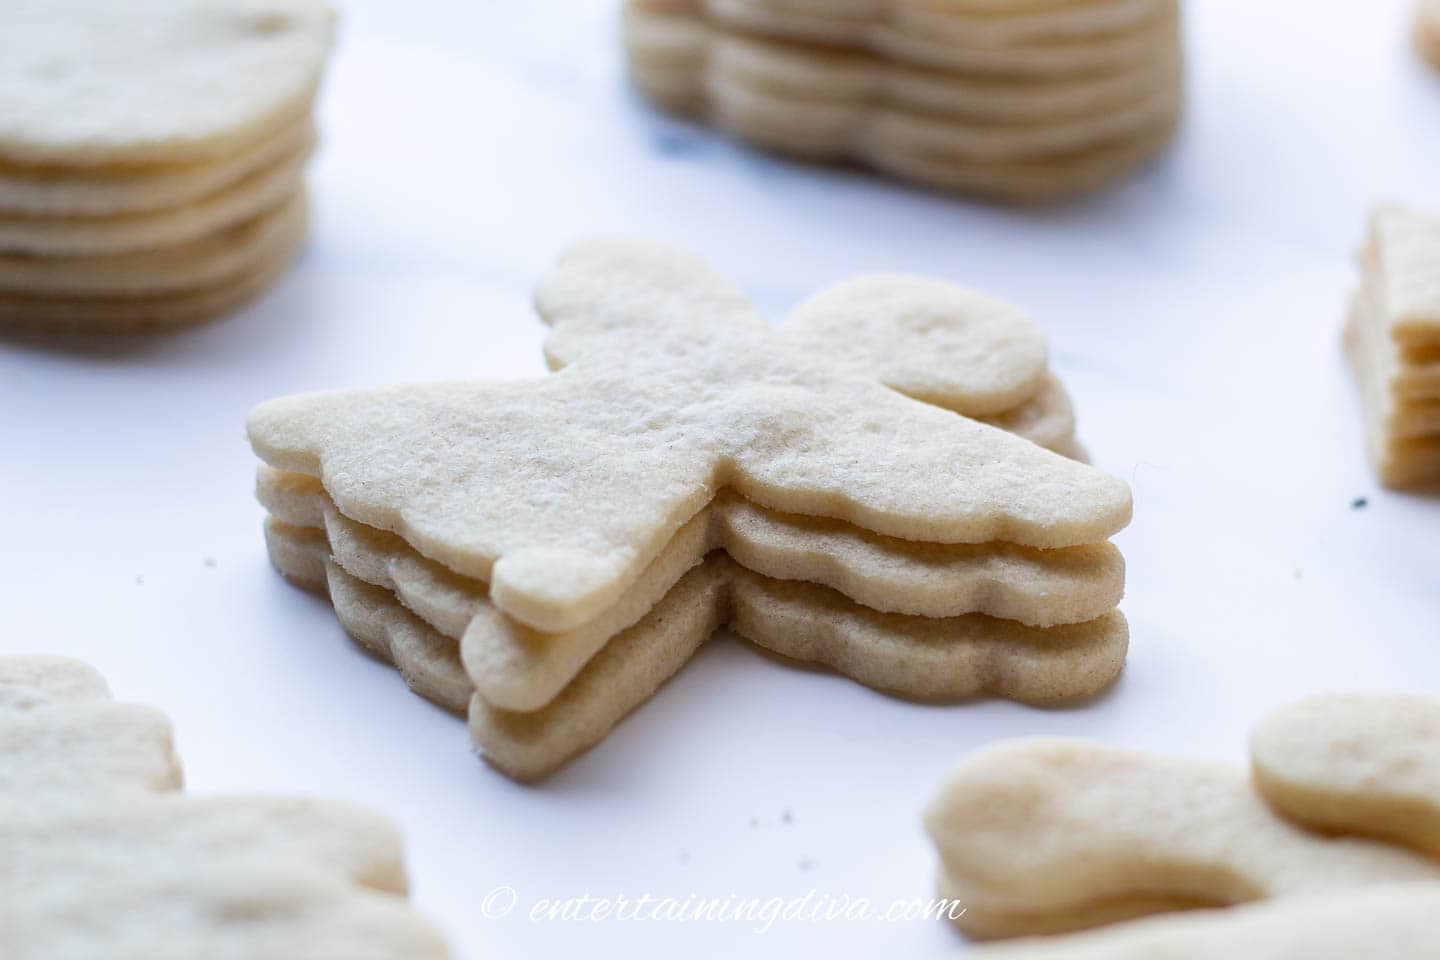 A stack of undecorated Christmas angel sugar cookies